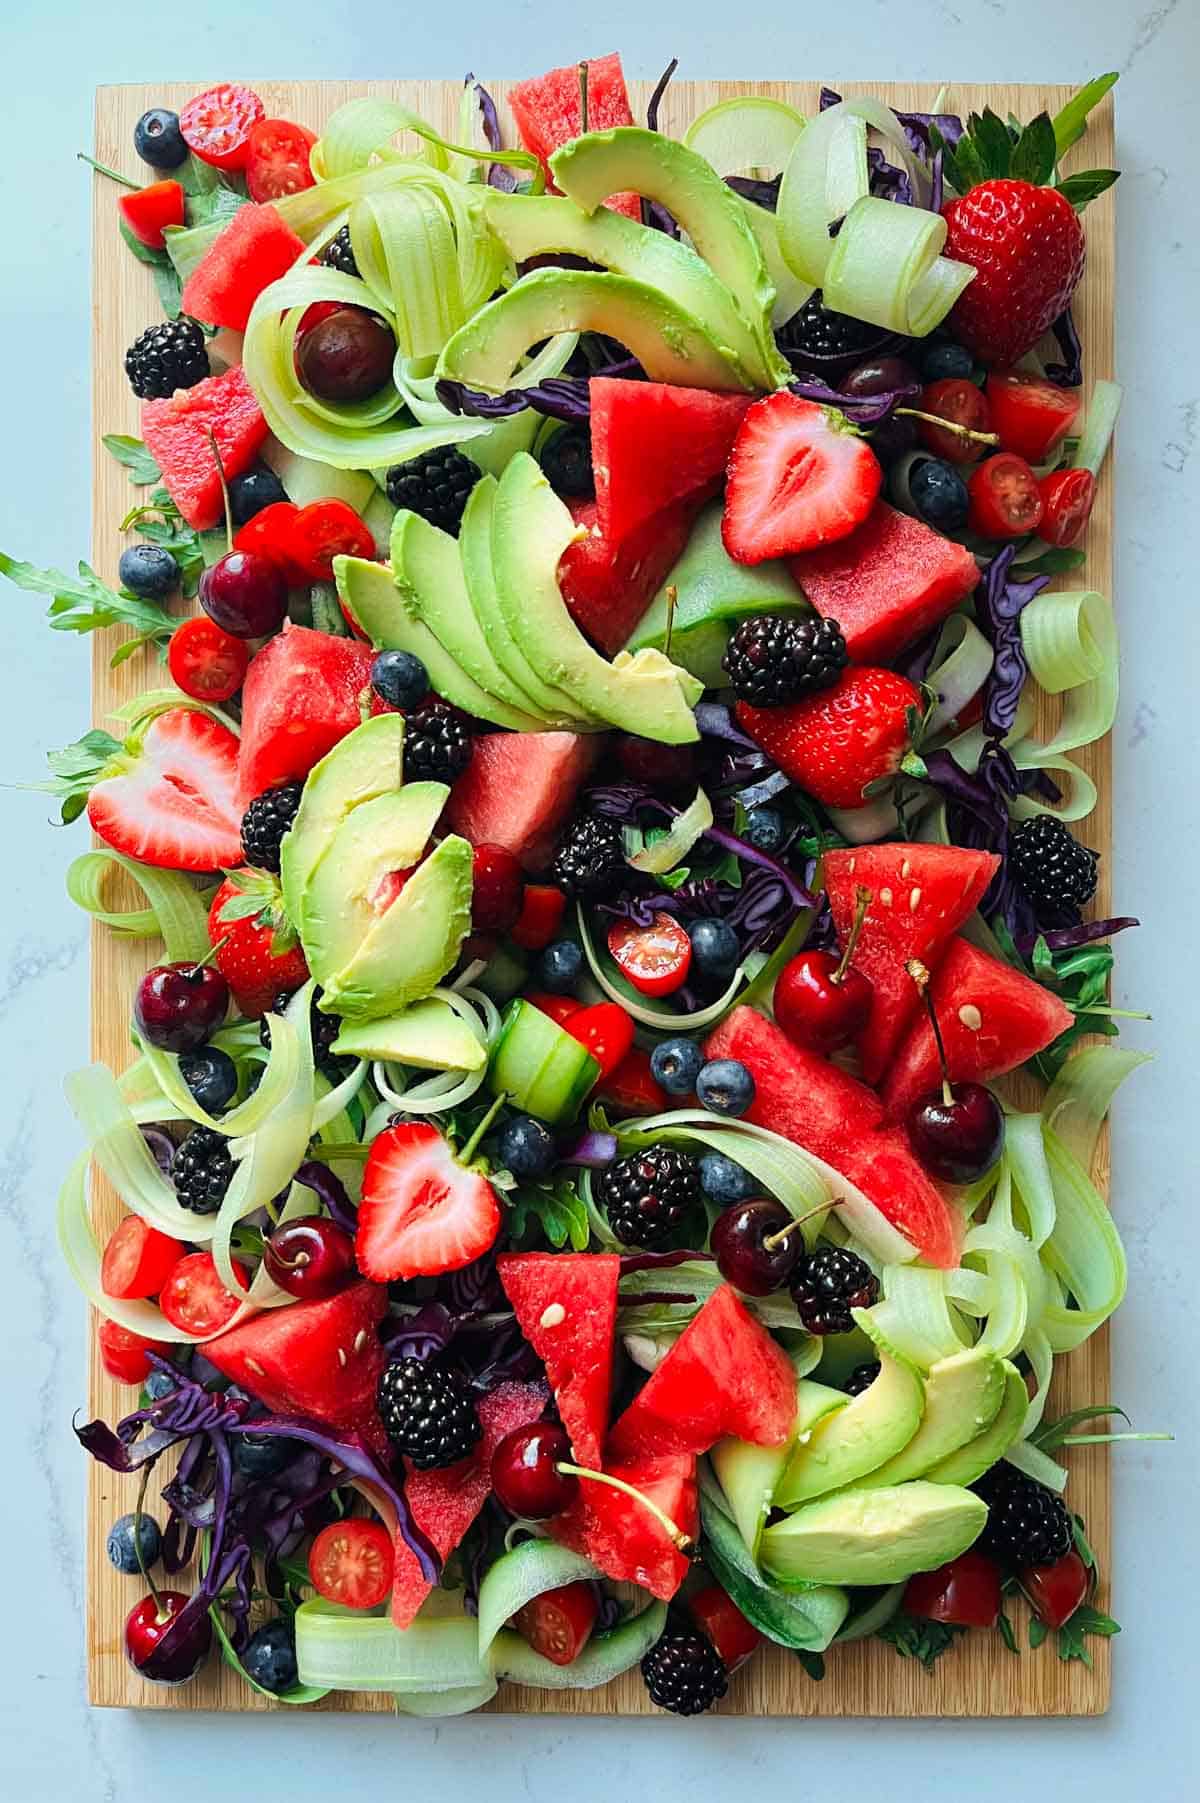 Rocket leaves, chopped red cabbage, celery and cucumber ribbons, watermelon, strawberries, tomatoes, blackberries, blueberries, cherries and avocado on a wooded board.